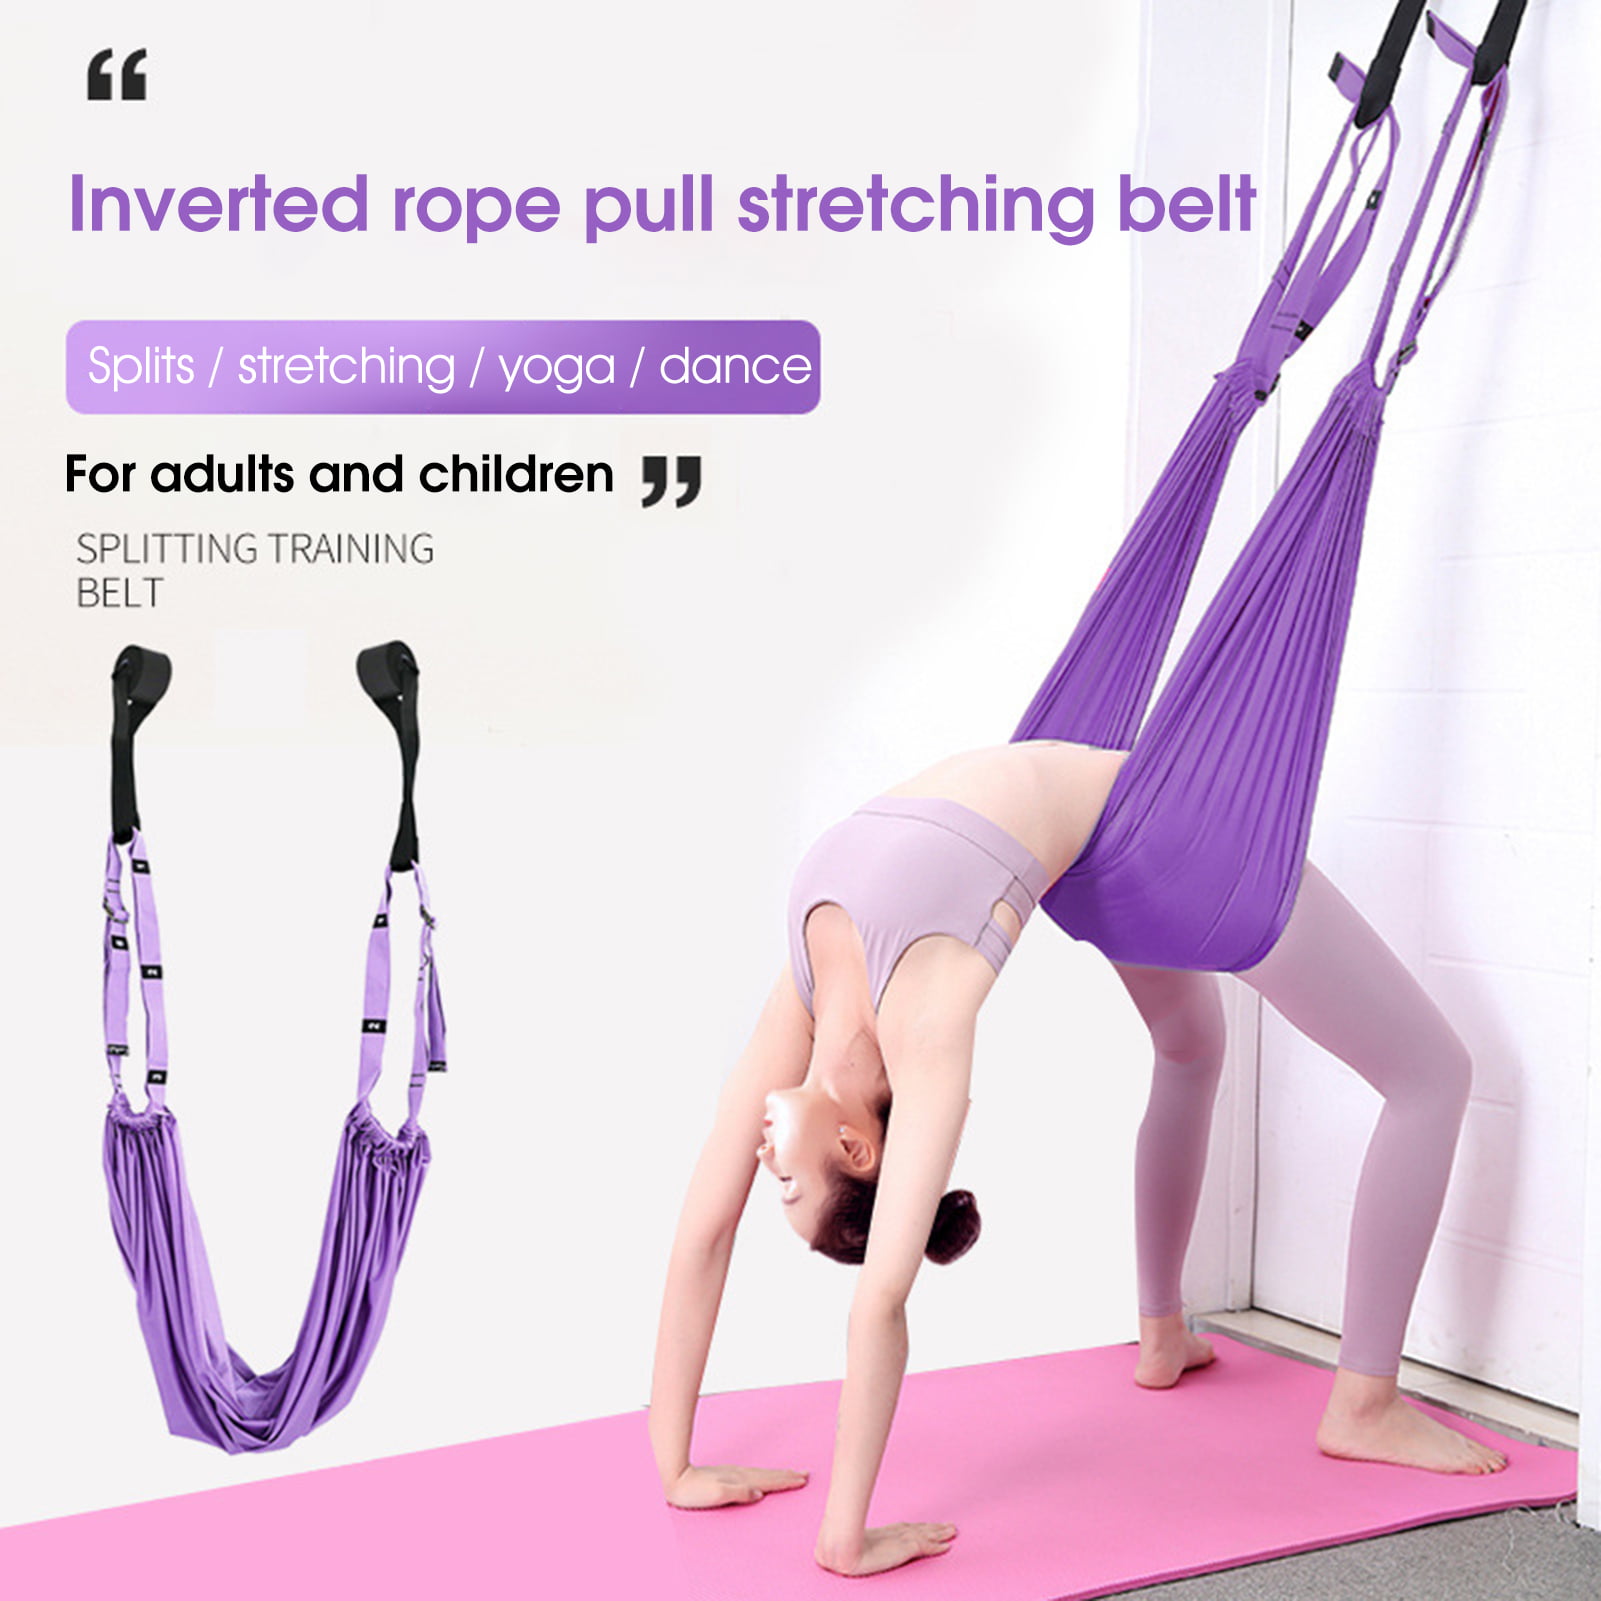 Details about   Aerial Yoga Strap Black Fitness Strap Band for Waist Trainer Leg Stretching 